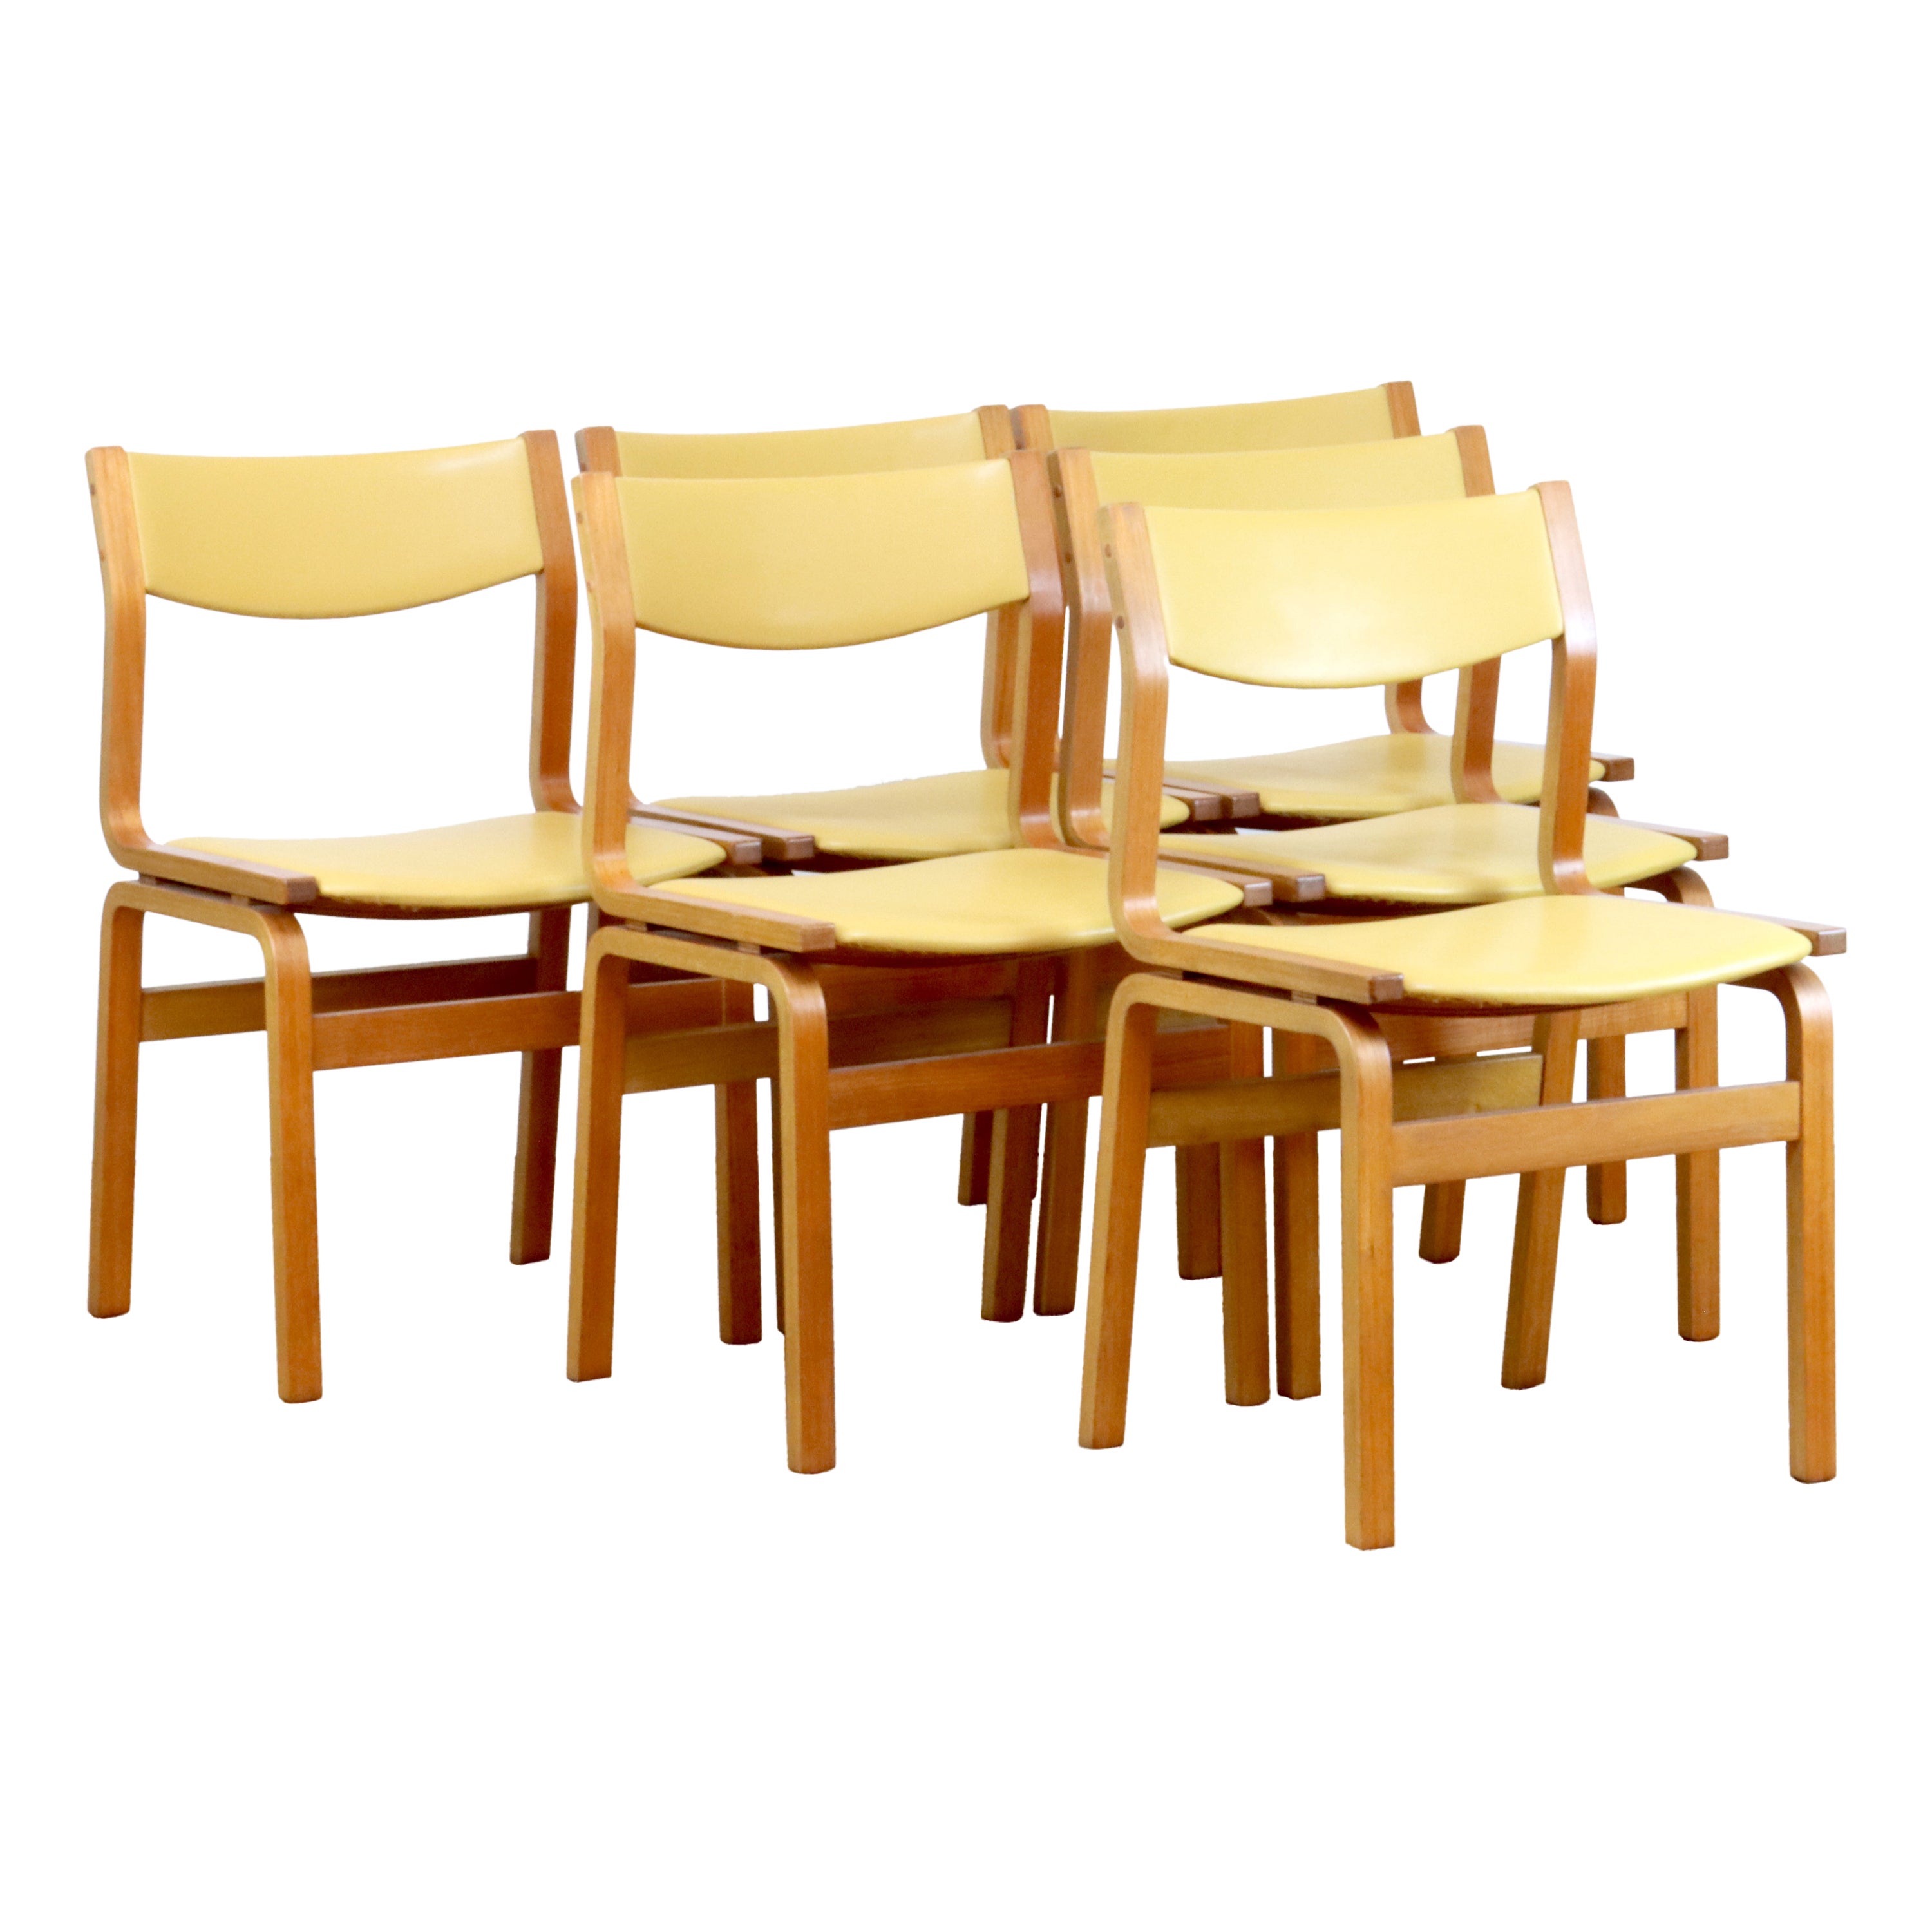 Set of 6 Chairs After Arne Jacobsen